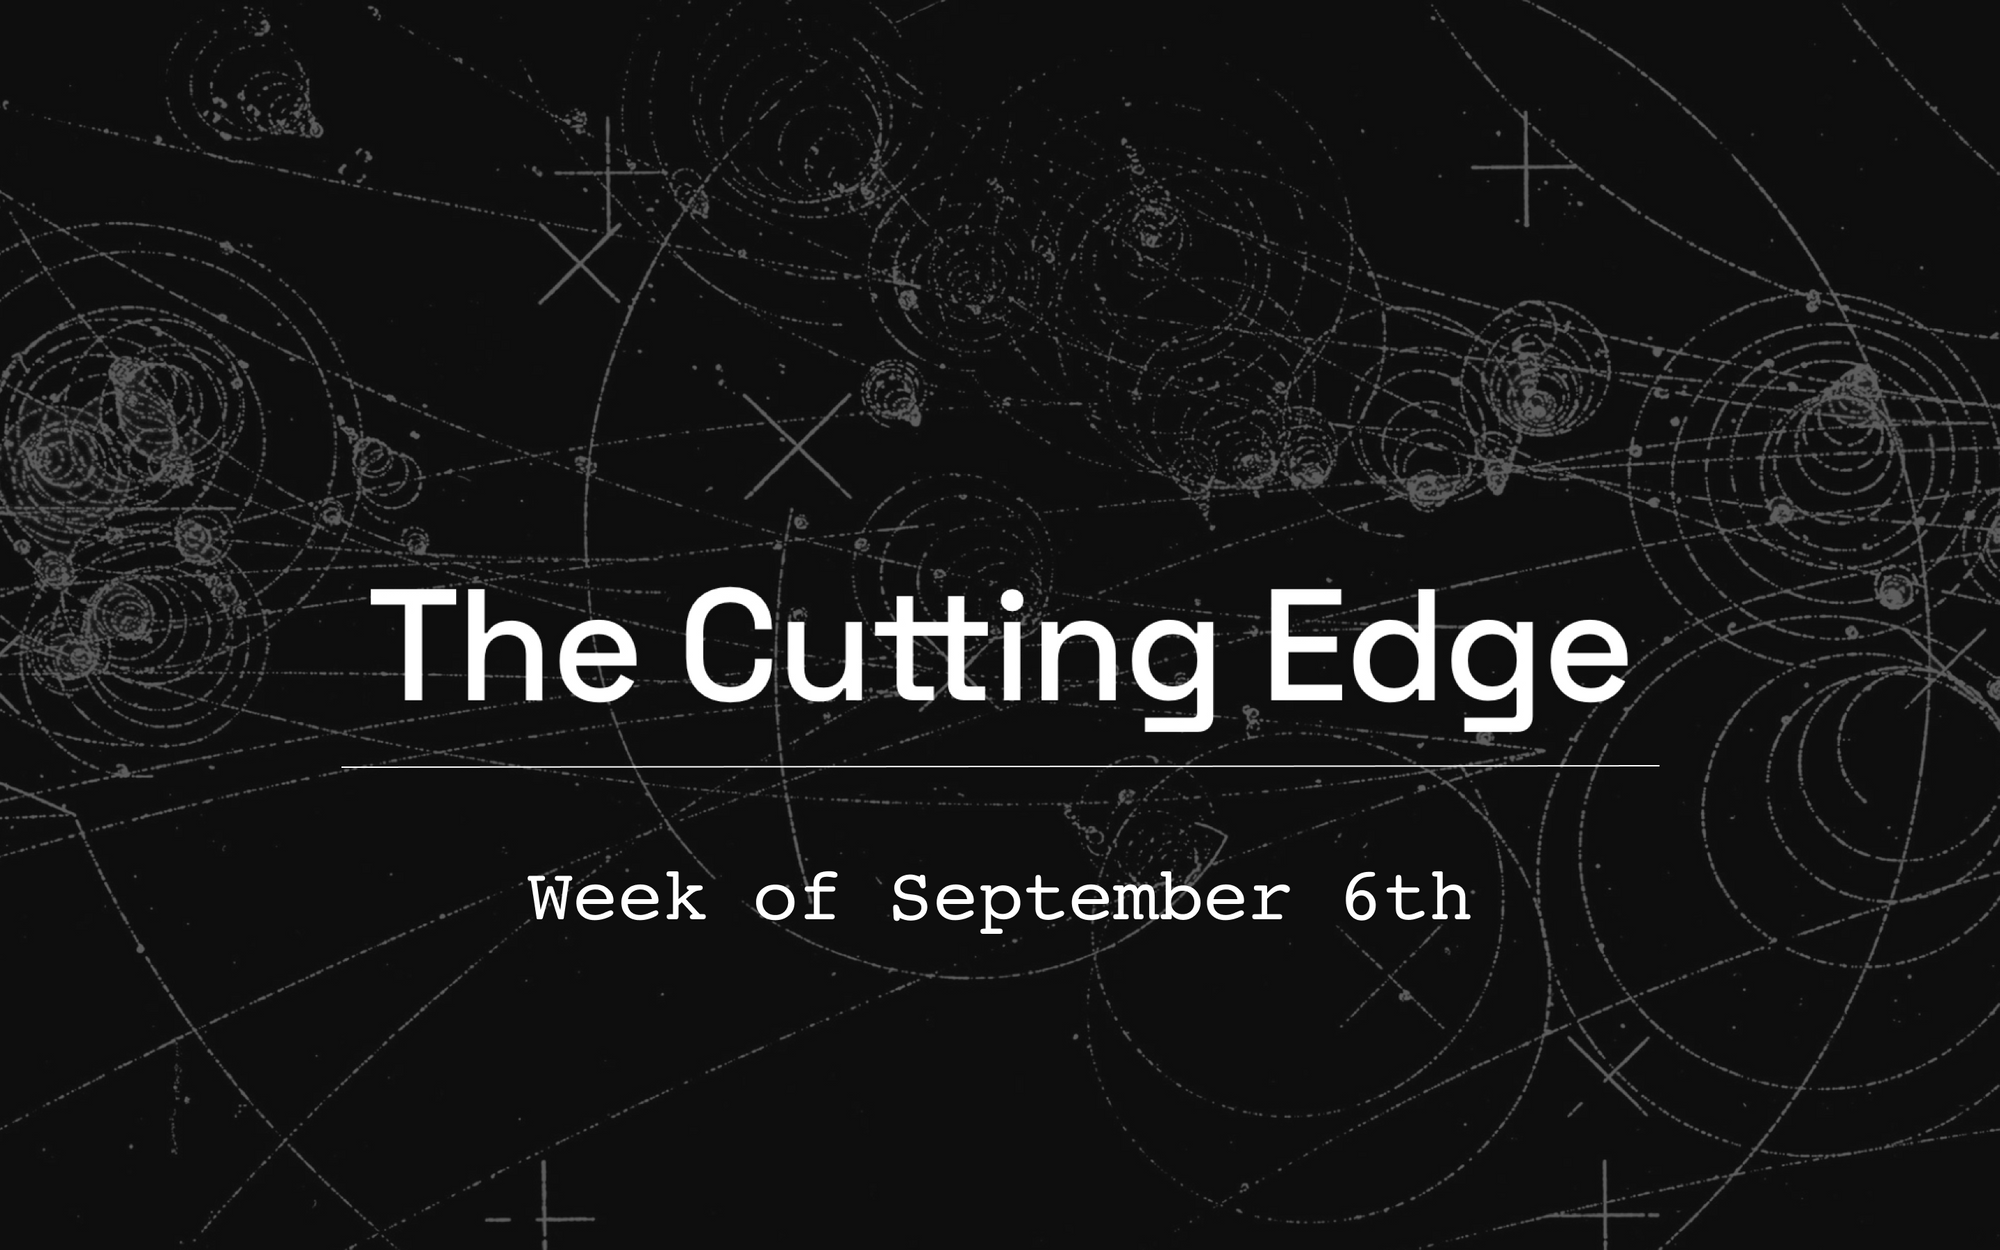 The Cutting Edge: Week of September 6th